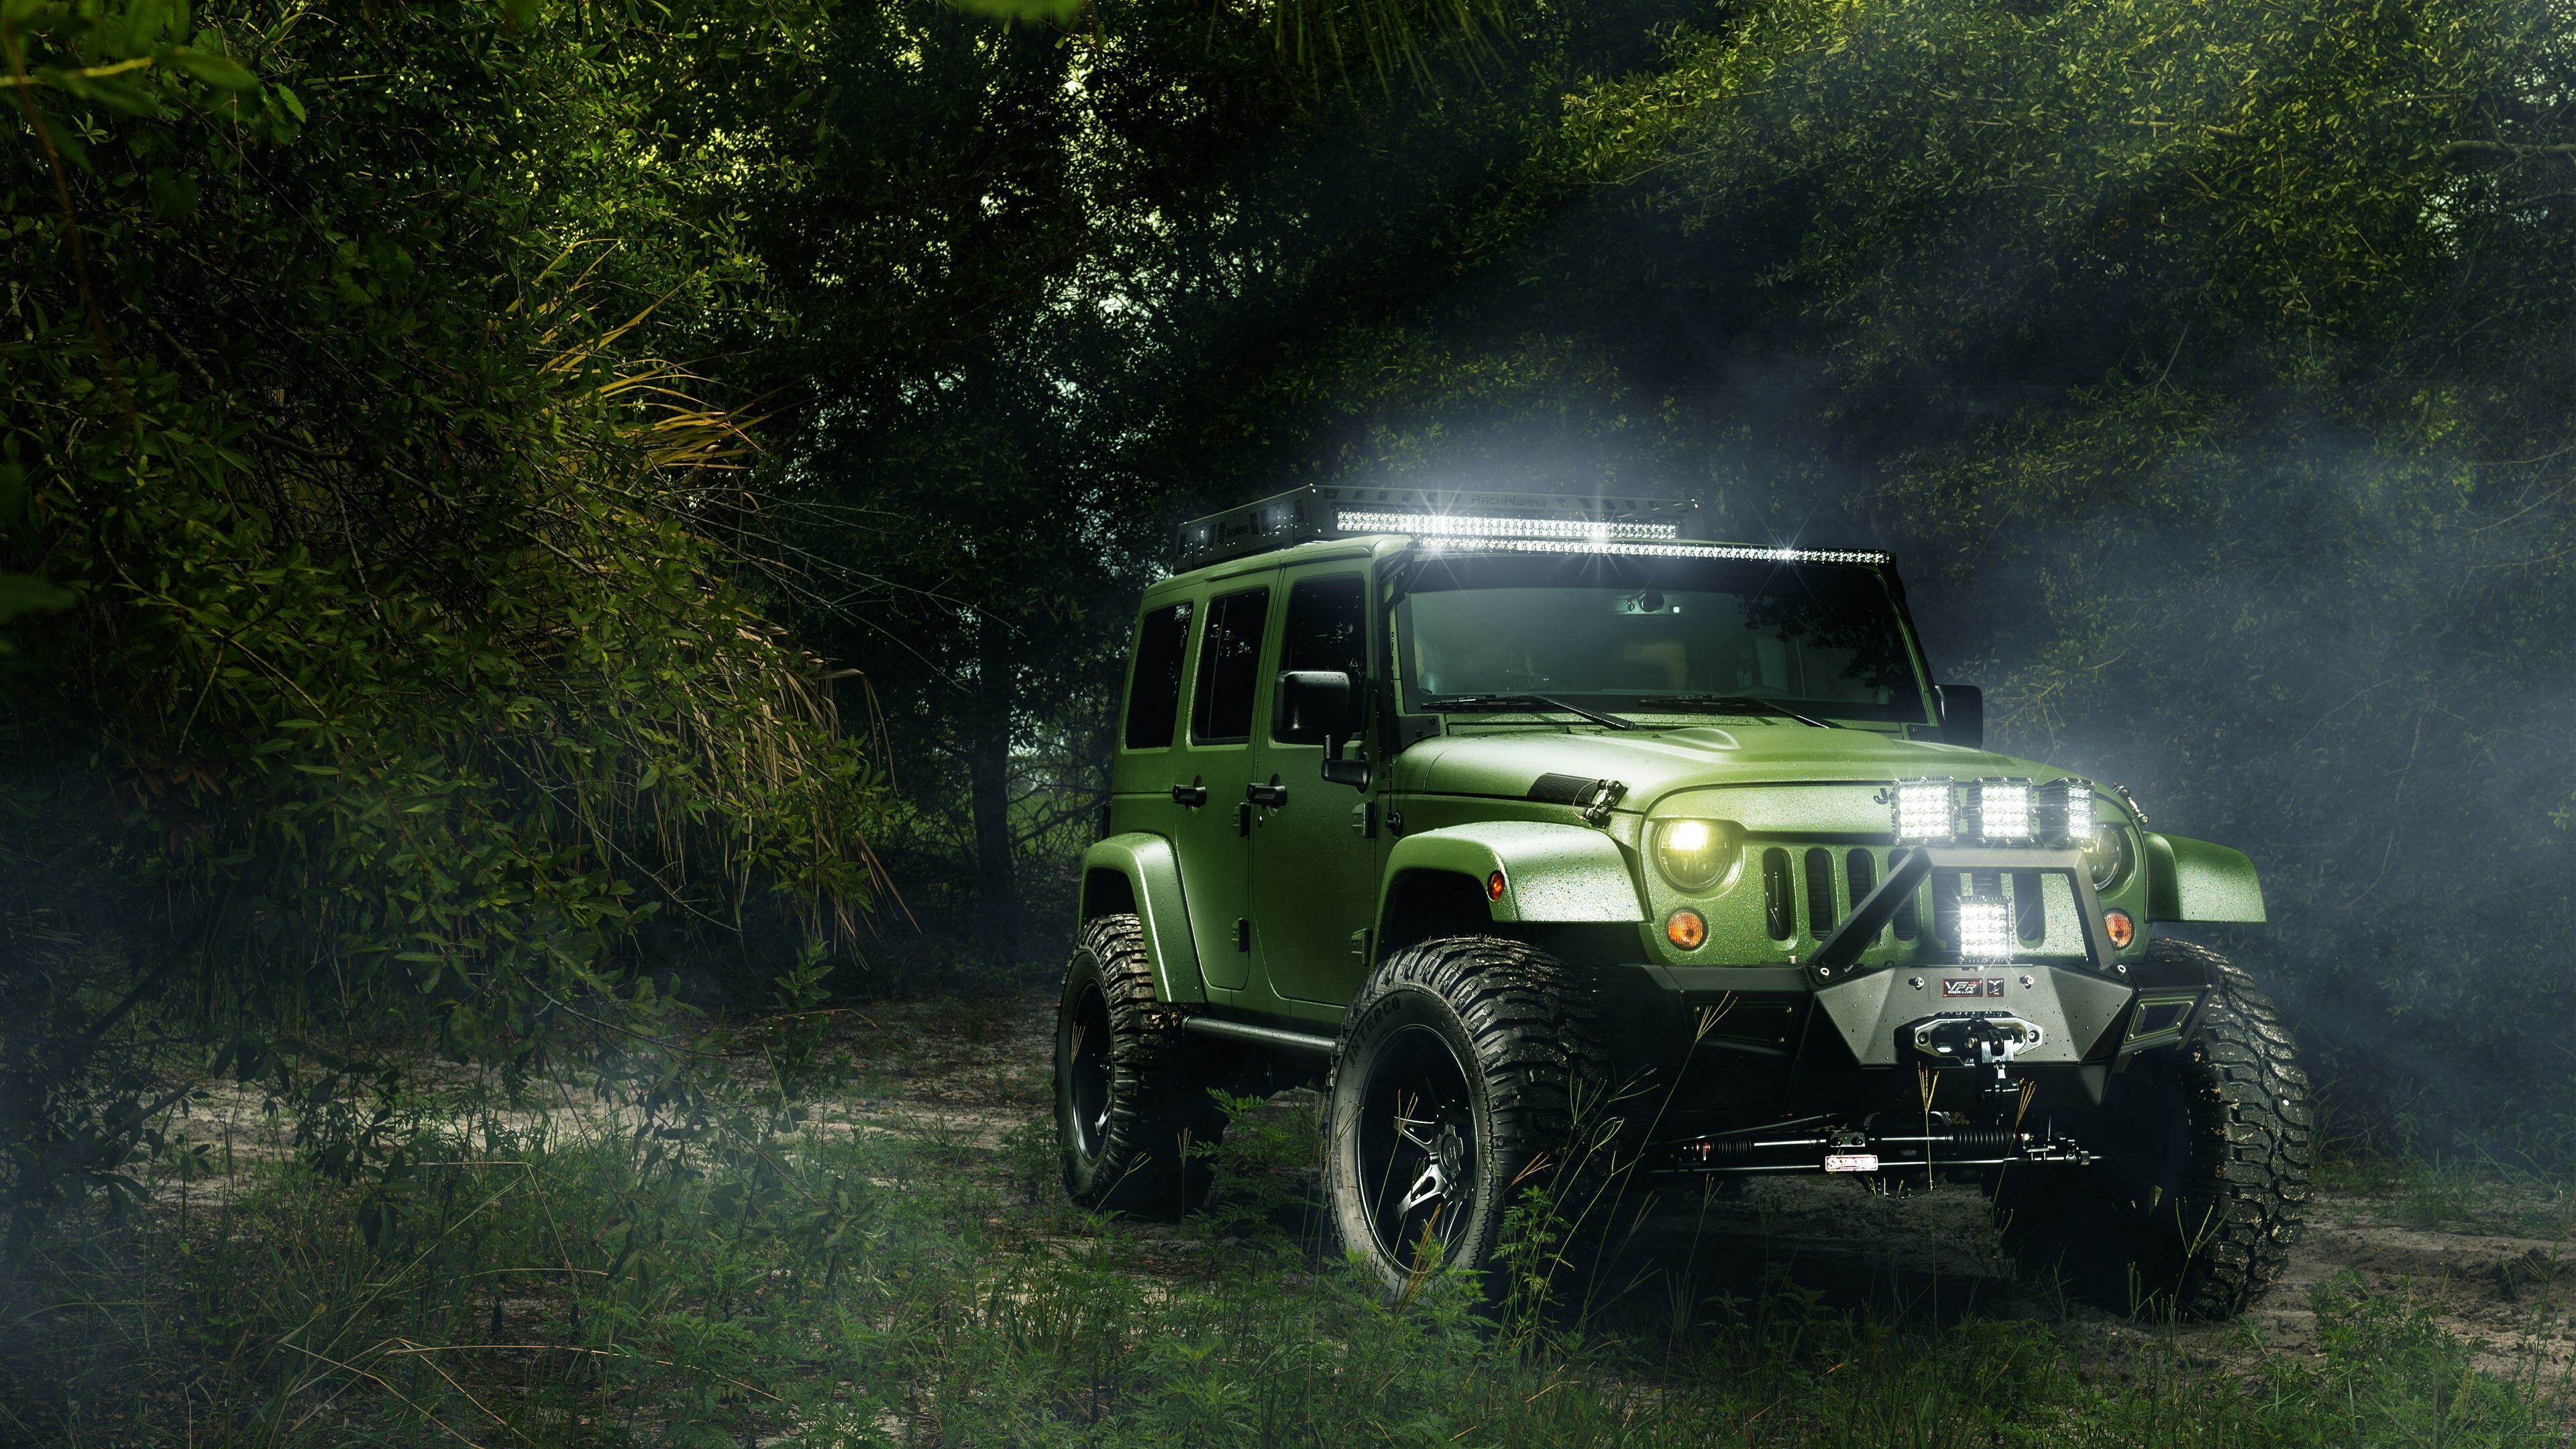 Jeep: Wrangler, A cross-country vehicle manufactured by the American company Chrysler. 3840x2160 4K Background.